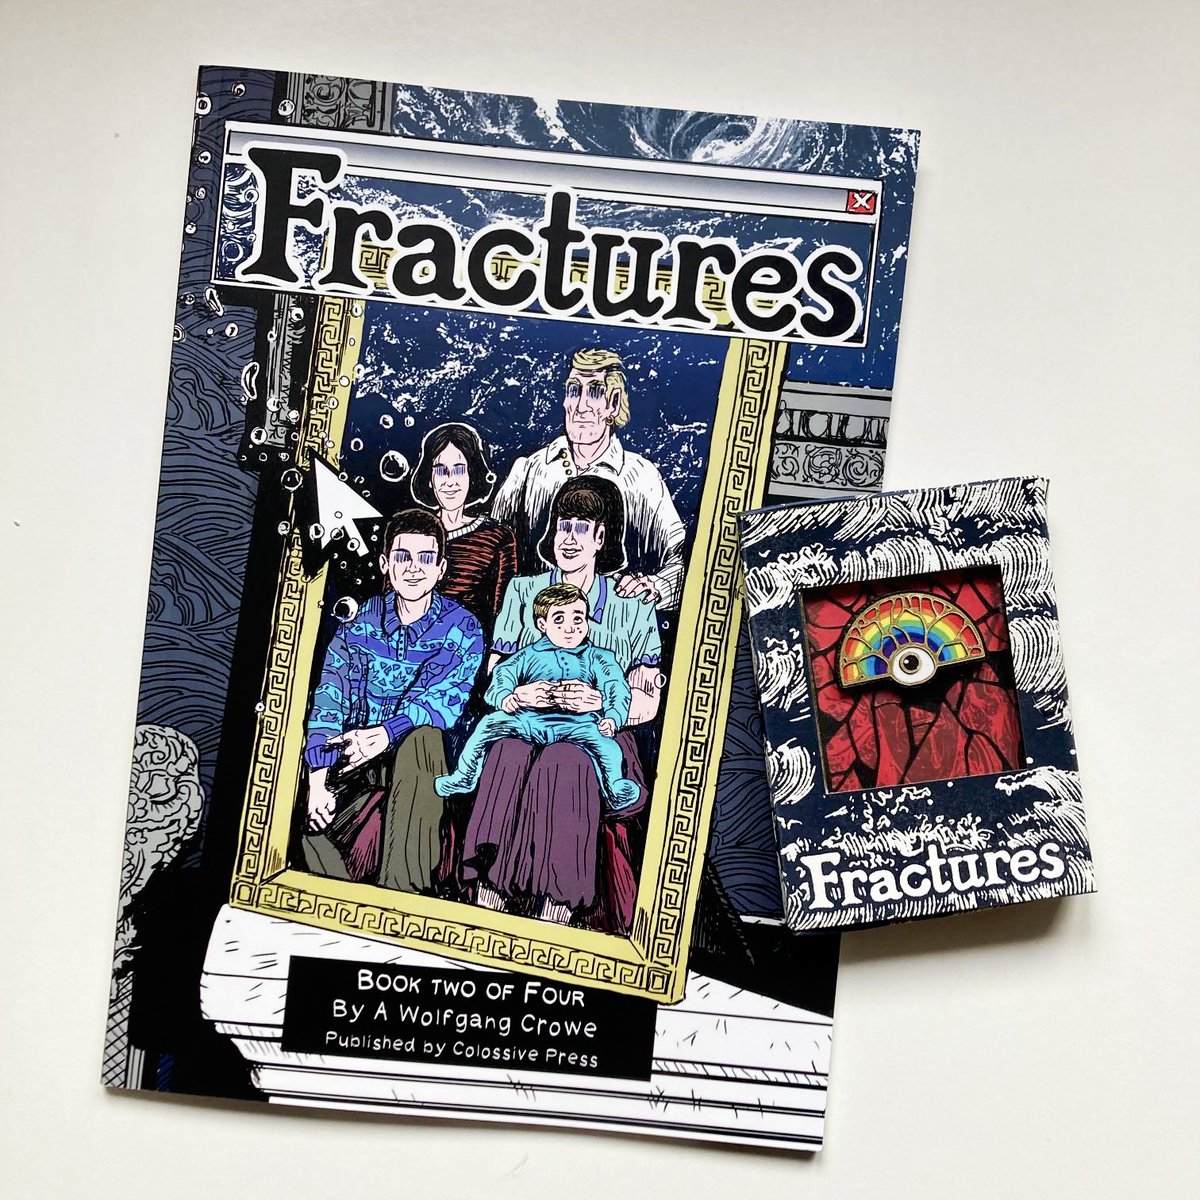 colossive.com/fractures-book…
📷 UK comics critic Paul Gravett says: ' In 'Fractures,' It takes the medium to a heightened level of full-on, fearless examination.'
📷 All sales of Book Two include a free, limited edition badge - hand-made by me - while stocks last.
#graphicmemoir